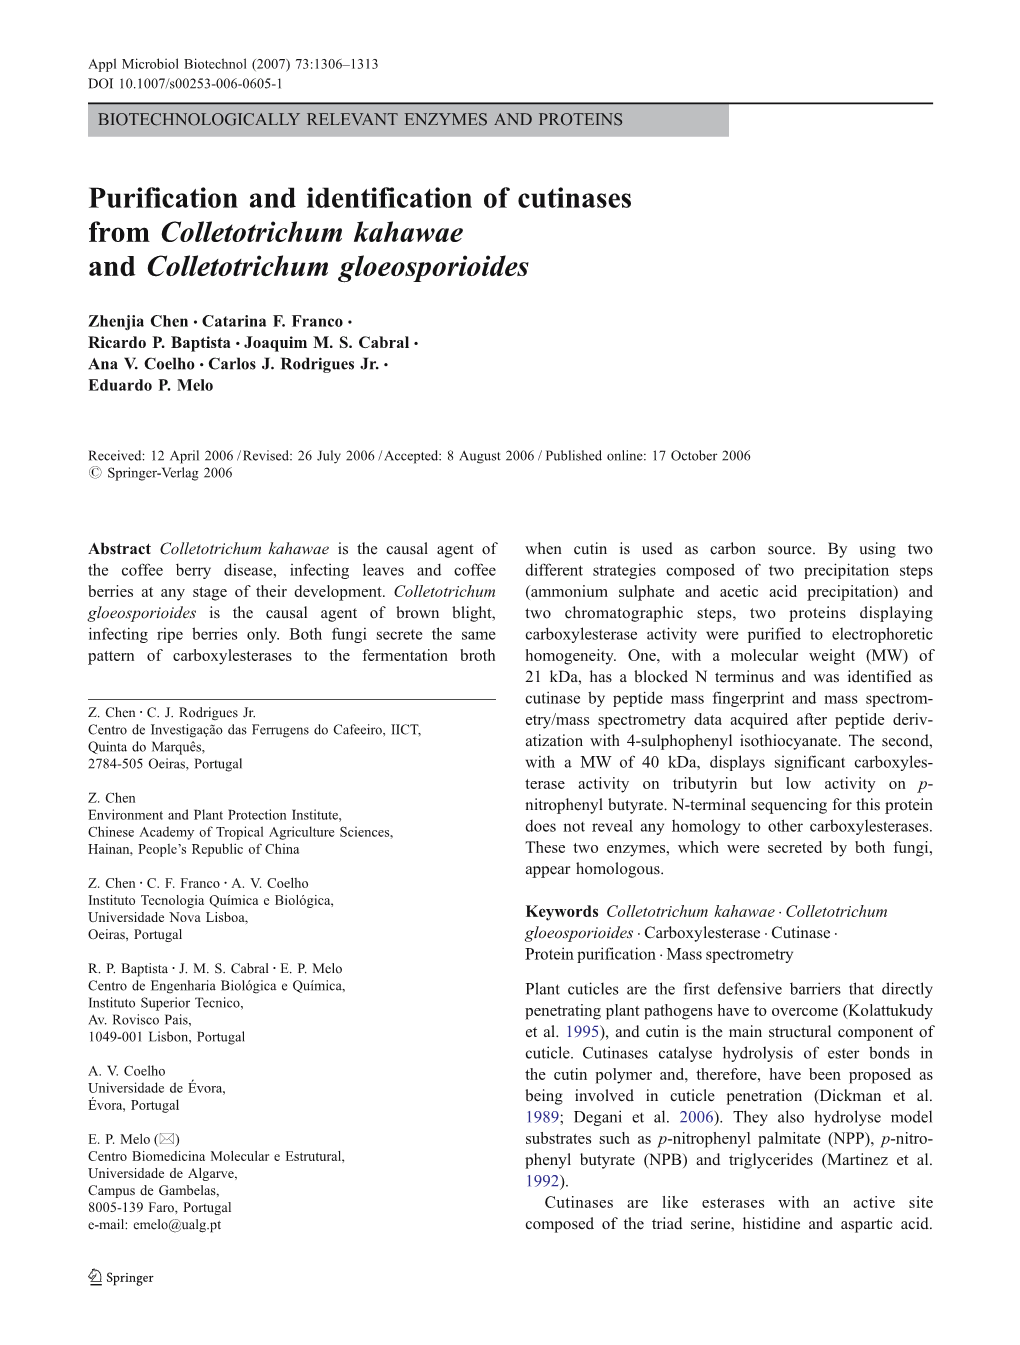 Purification and Identification of Cutinases from Colletotrichum Kahawae and Colletotrichum Gloeosporioides